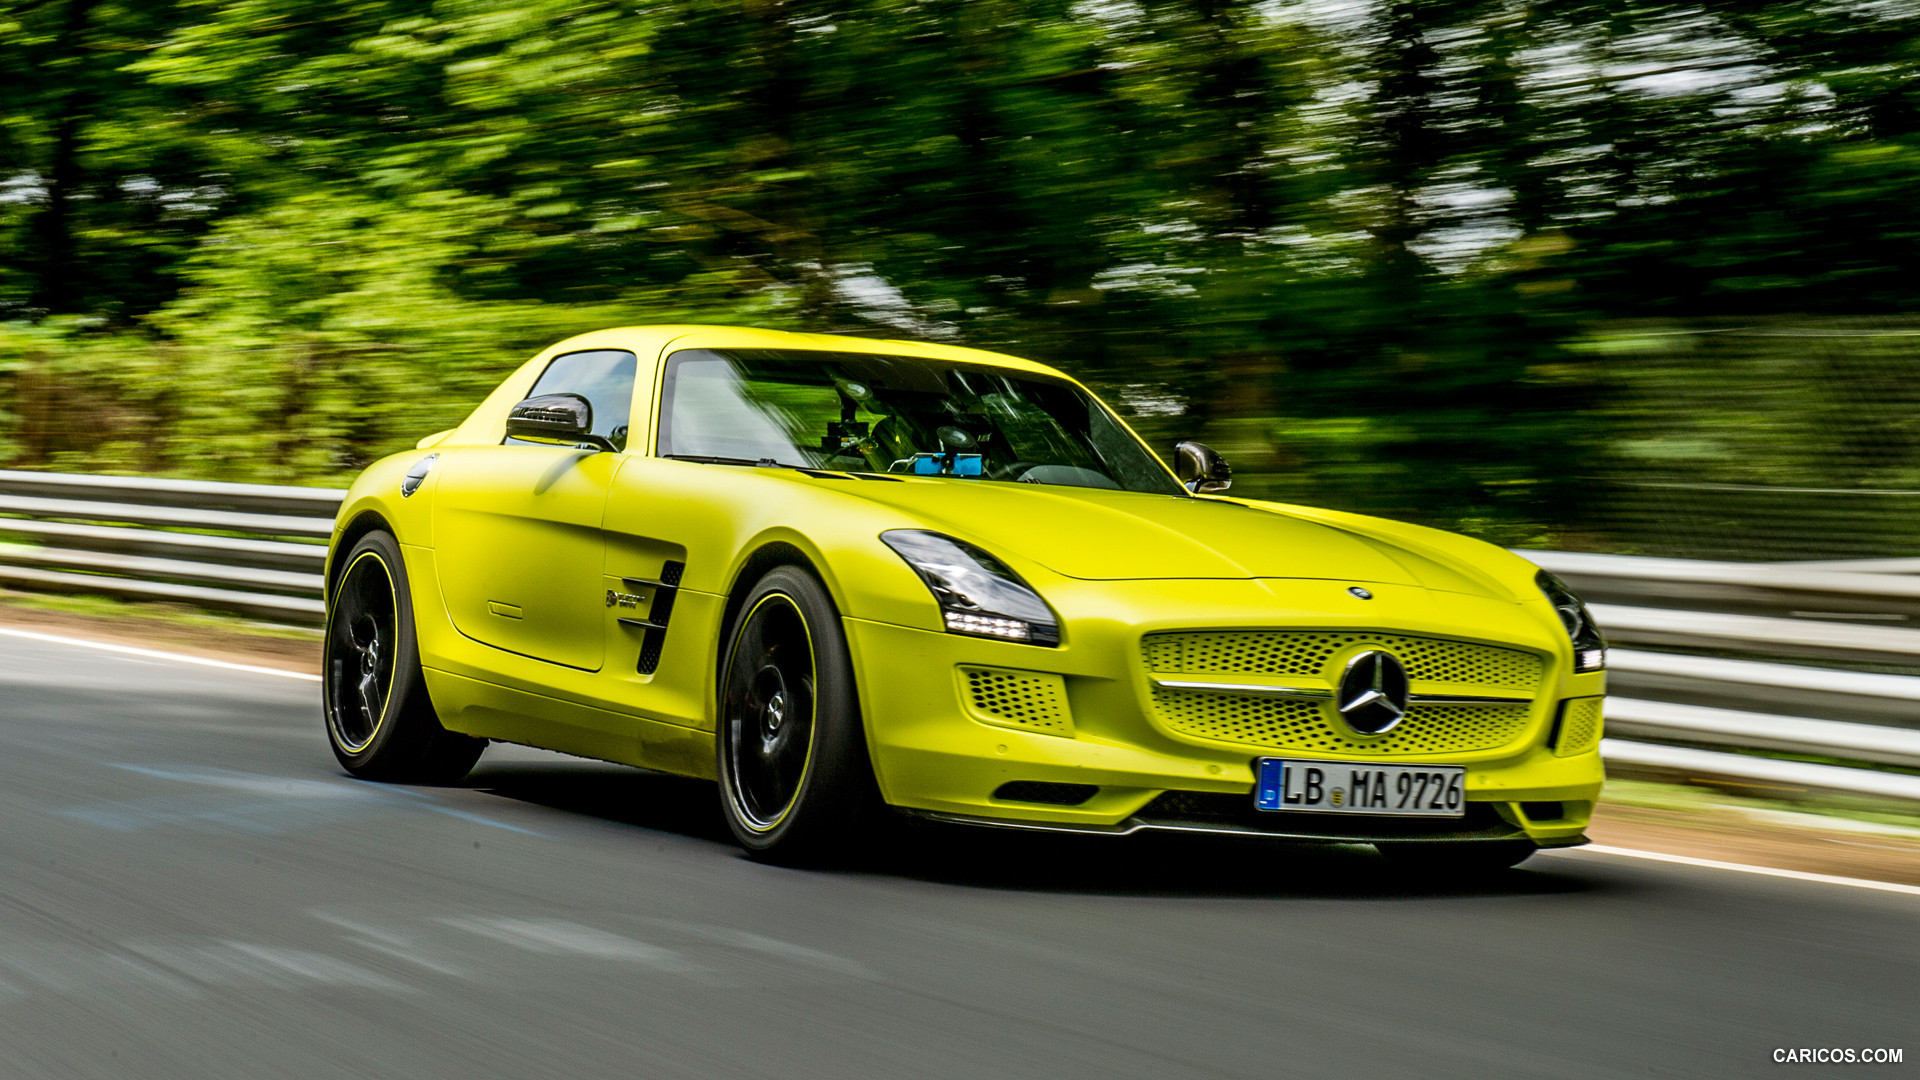 2014 Mercedes-Benz SLS AMG Coupe Electric Drive, Yellow at Nürburgring   - Front, #36 of 47